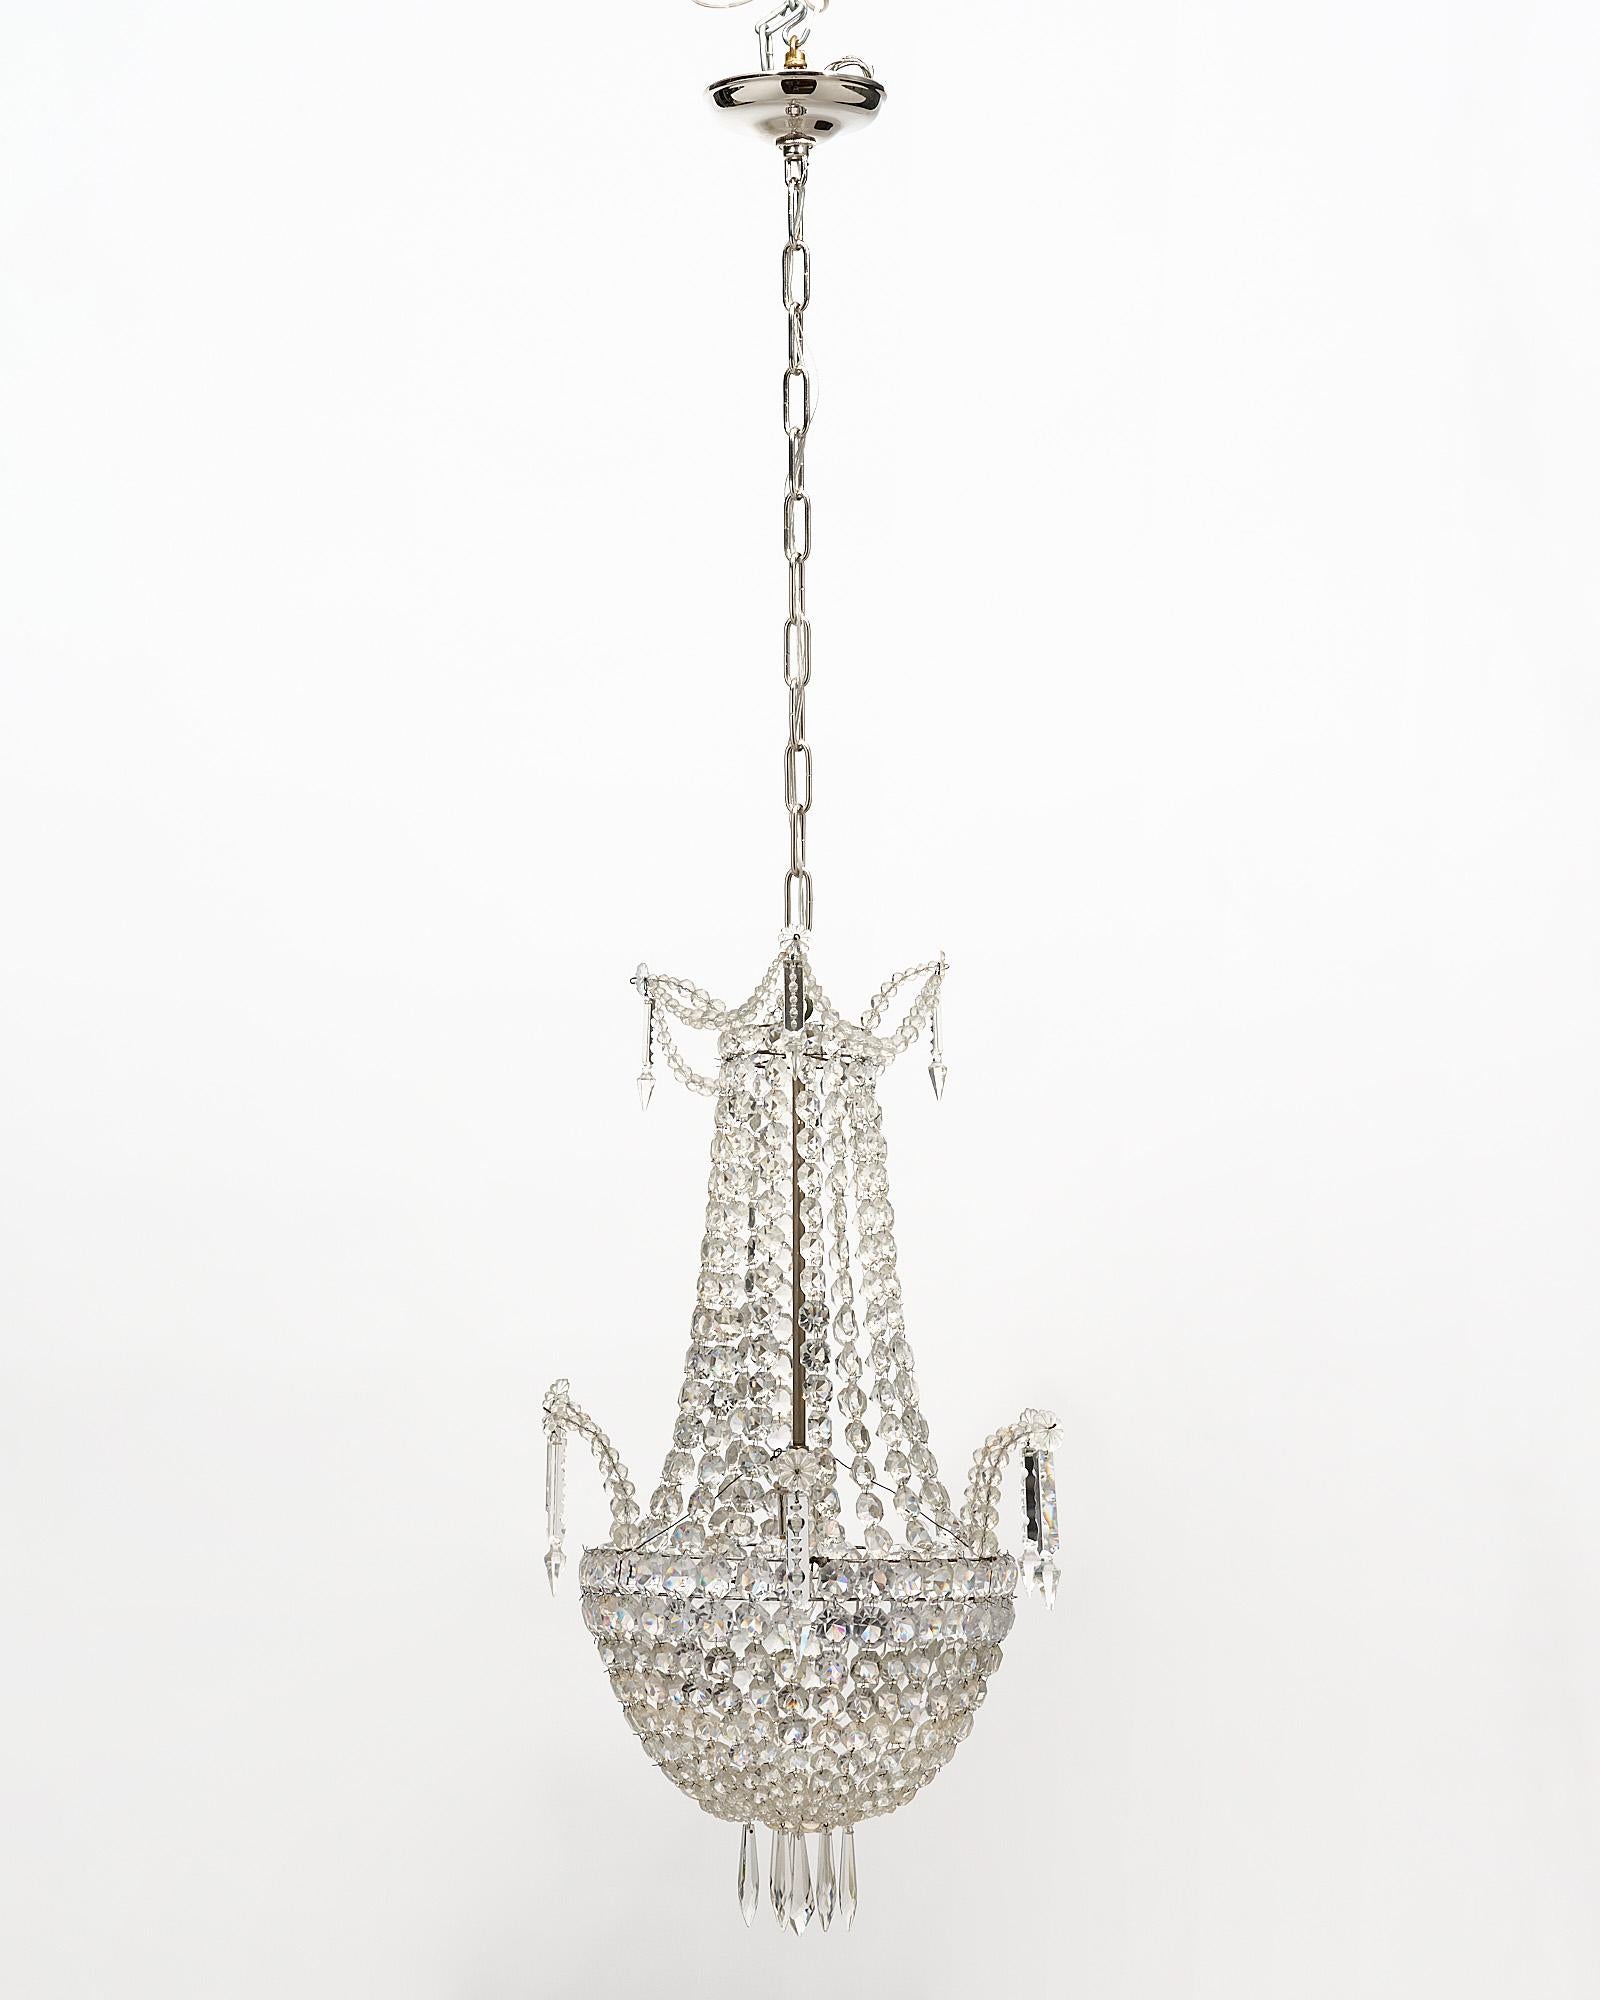 Chandelier, French, by Baccarat with the original cut crystals and pendants.
The current height from ceiling is 52